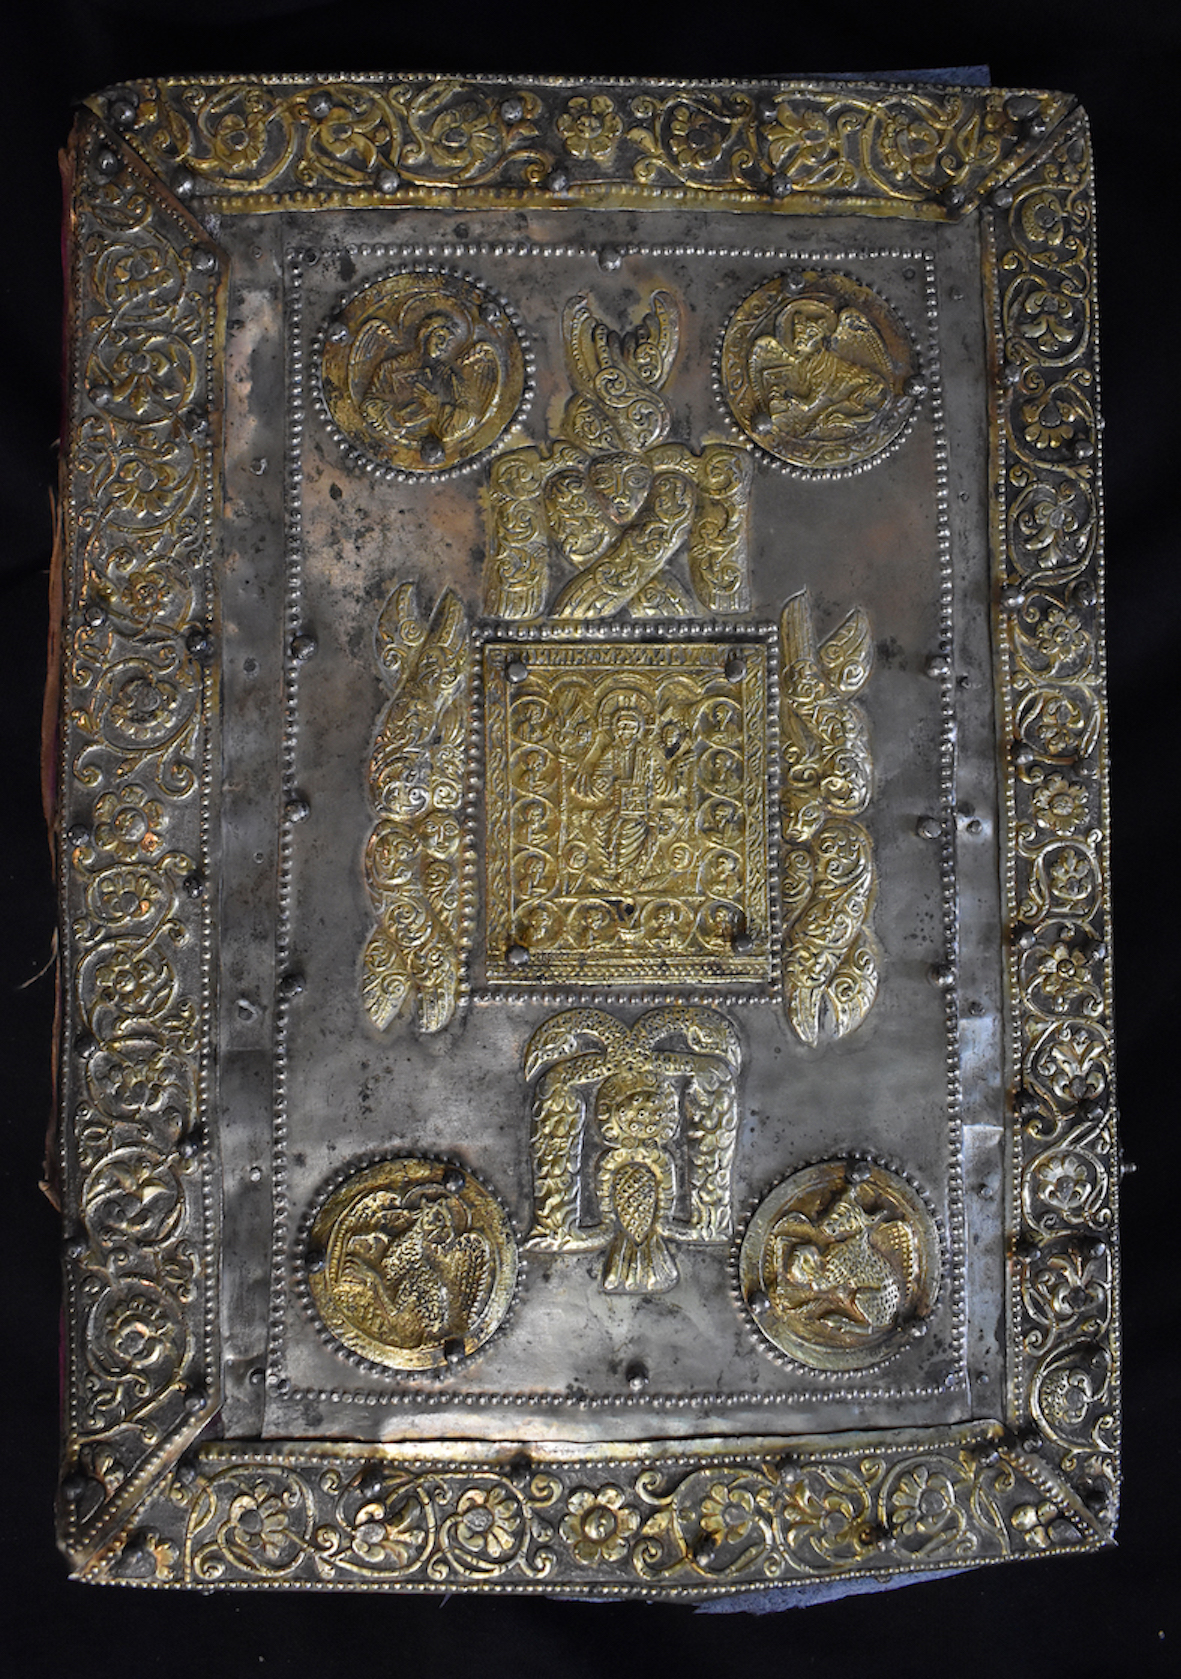 Back cover of Gospel book by the goldsmith Dimos, 1673, front cover; wooden board, velvet, metallic plaques and stripes, partly gilt, enamel, repoussé, filigree, Church of St Nicholas, Metaxochori, Aghia, Thessaly) (source: project «Ecclesiastical Silver: Study and Documentation using Non-Destructive Techniques of Ecclesiastic Plate in Magnesia and Larissa Districts (15th - 19th centuries)» (MIS 5005968), Y. Varalis and C. Dolmas)